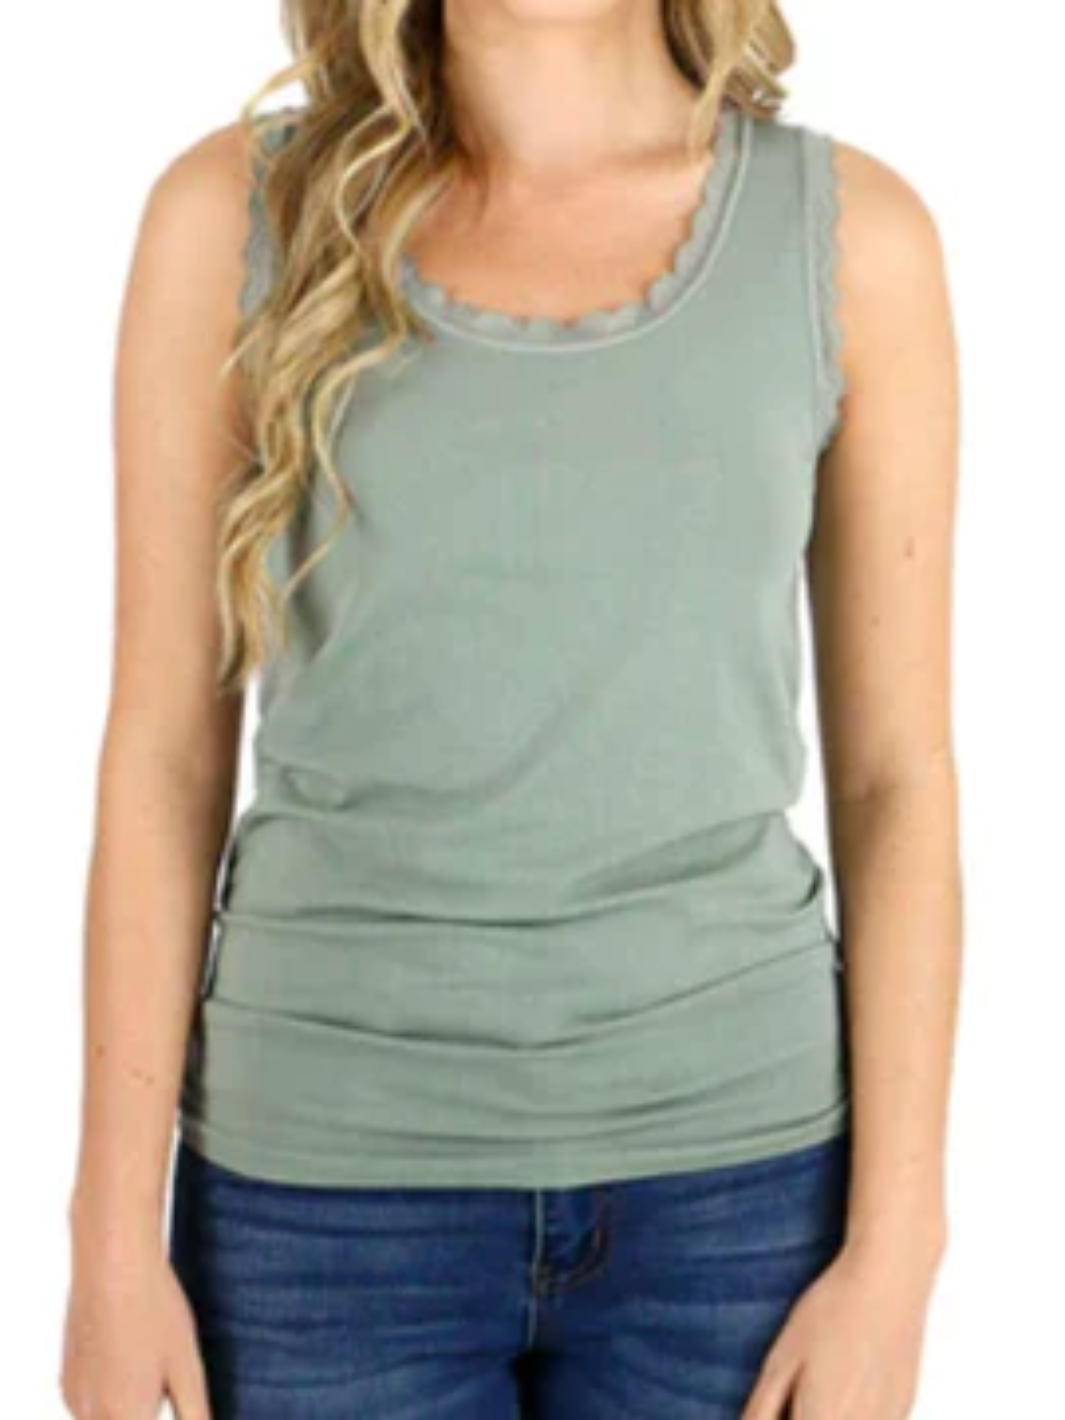 Lace Trimmed Perfect Fit Tank (one size)